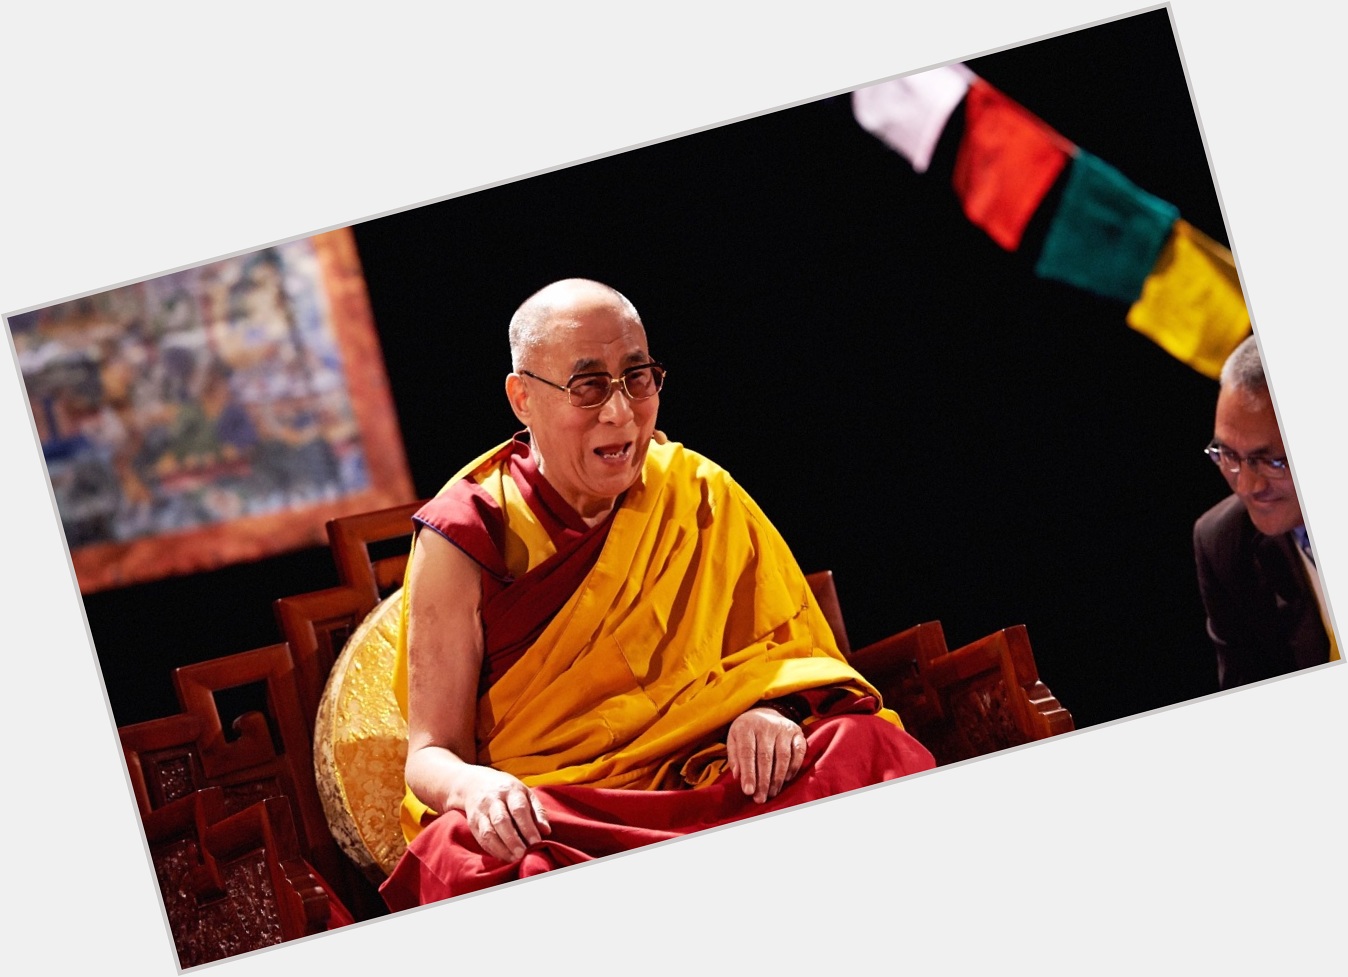 Wishing a very happy 88th birthday to His Holiness the Dalai Lama -  